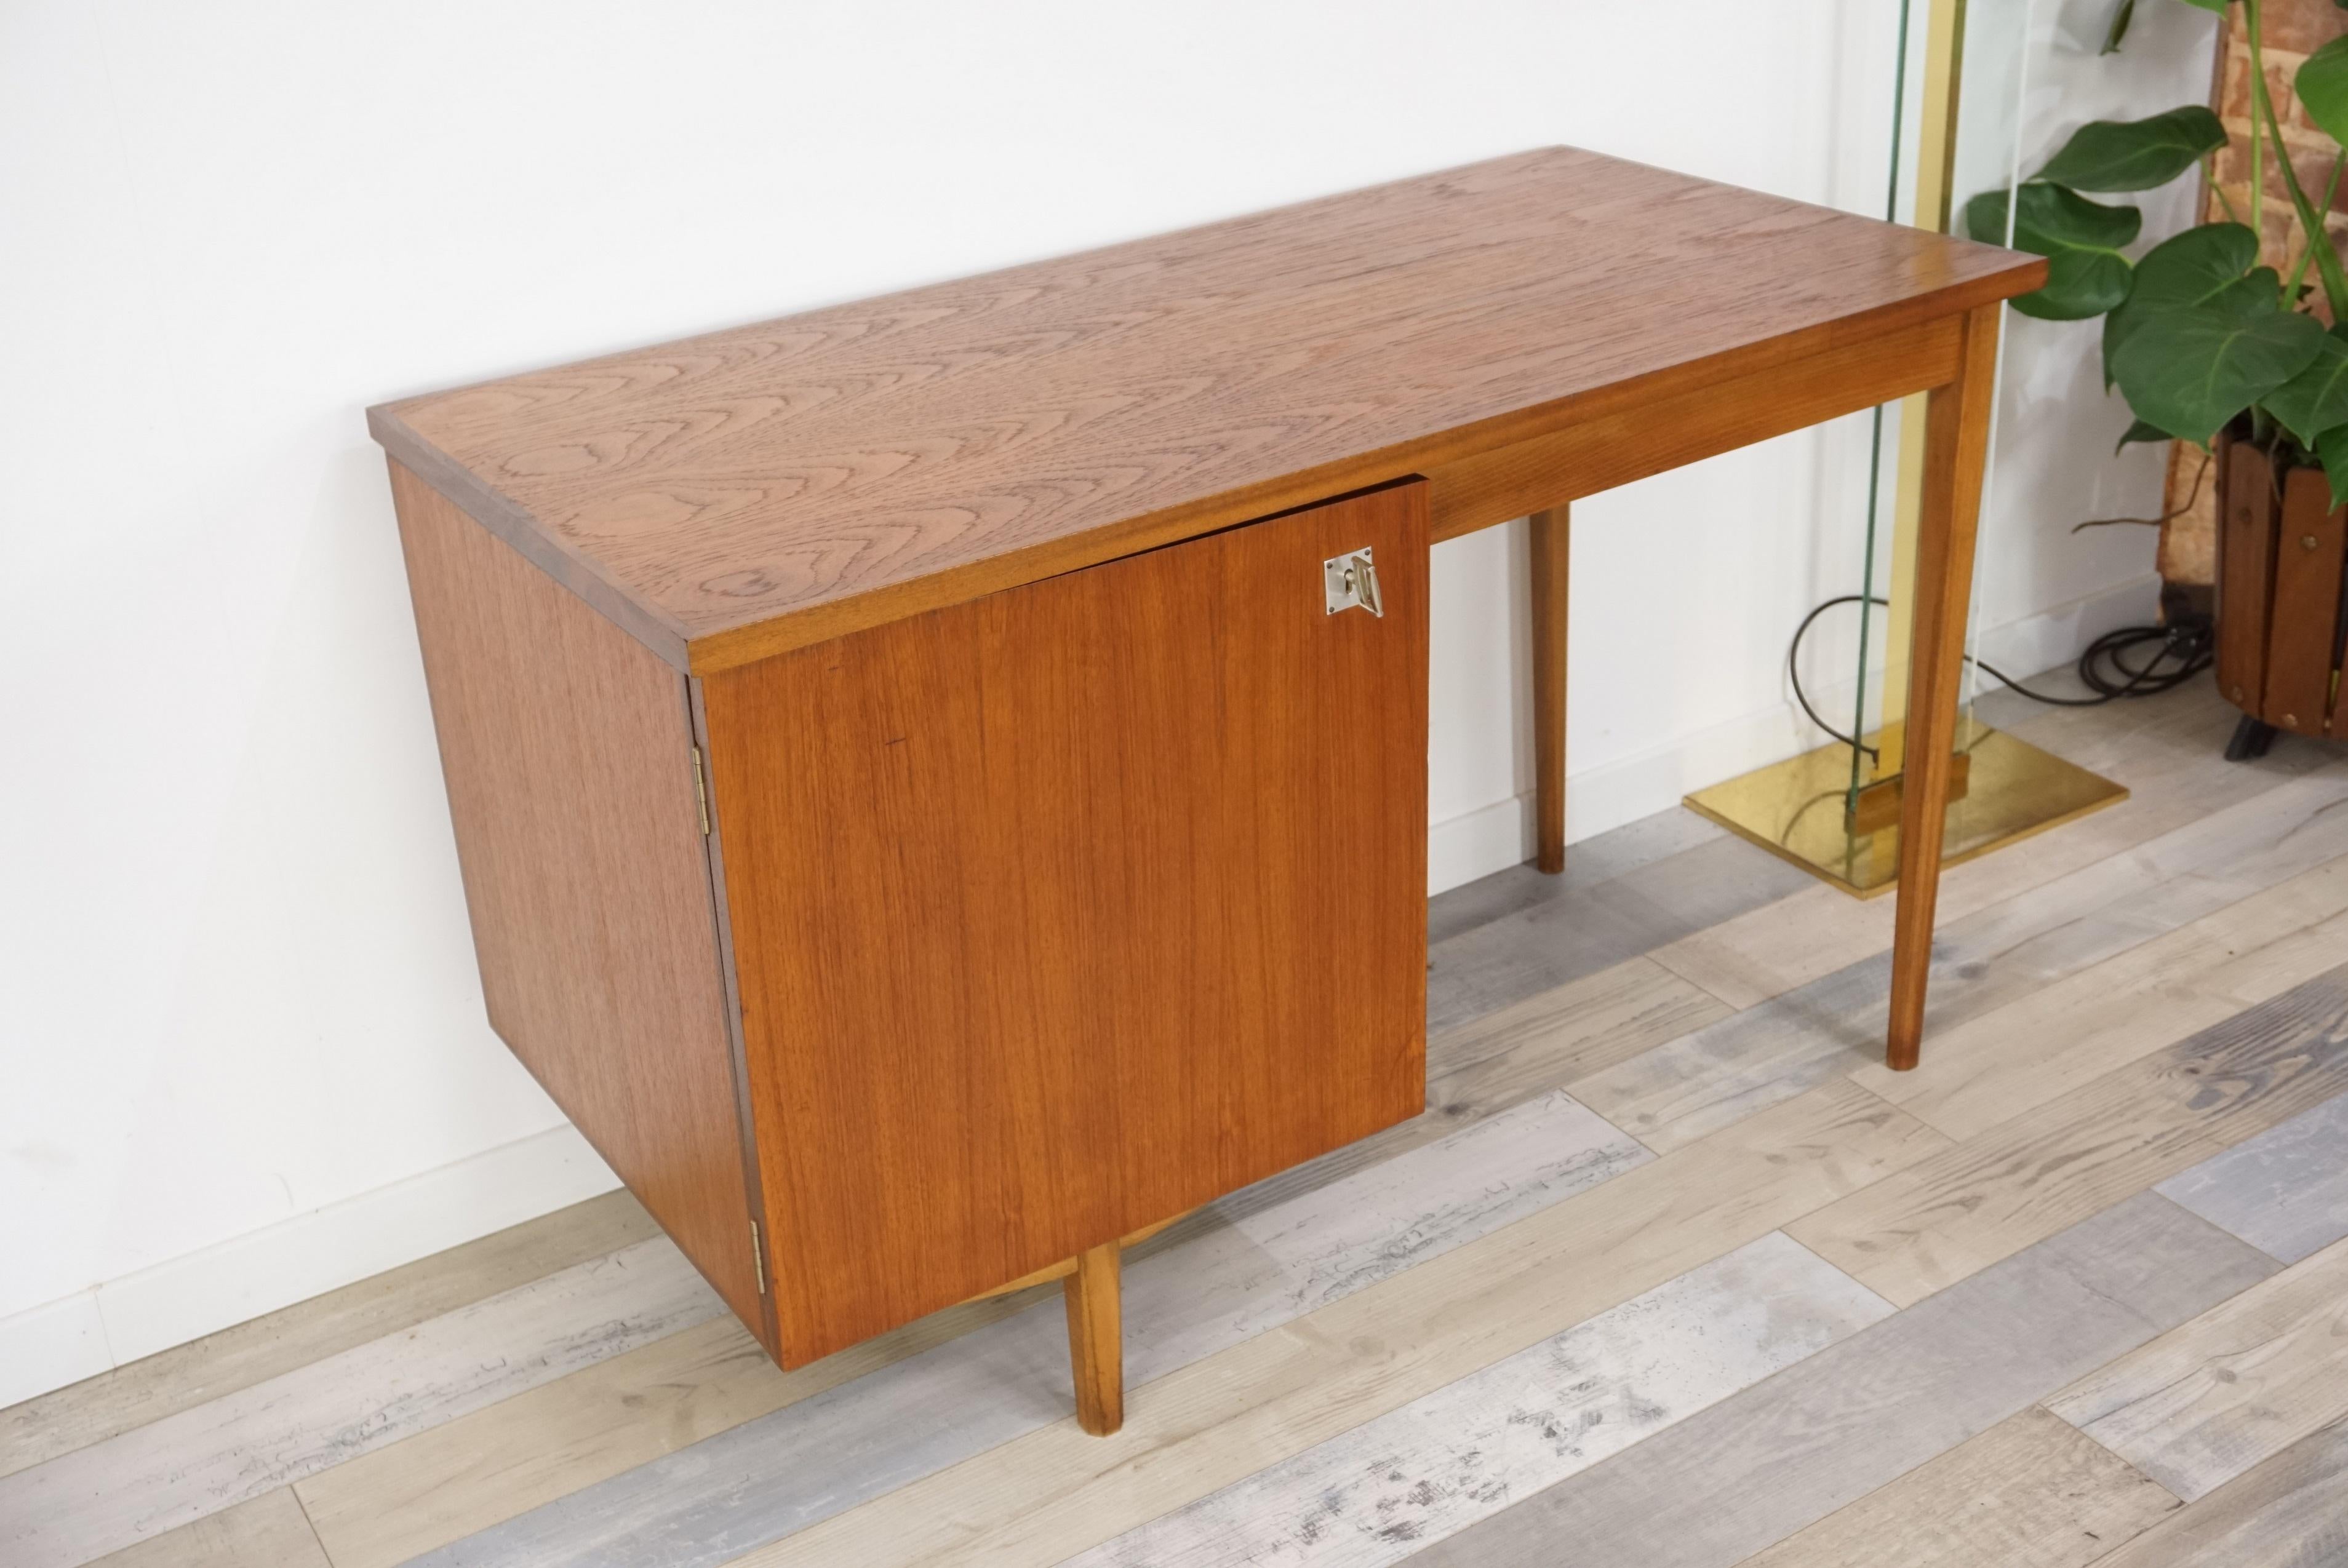 This combine Europe brand adorable desk, from the late 1950s, robust and high quality, has graphic timeless lines. Teak wooden structure, compoas feet, Beautiful and spacious storage space, lots of charm, class and character, it is in beautiful